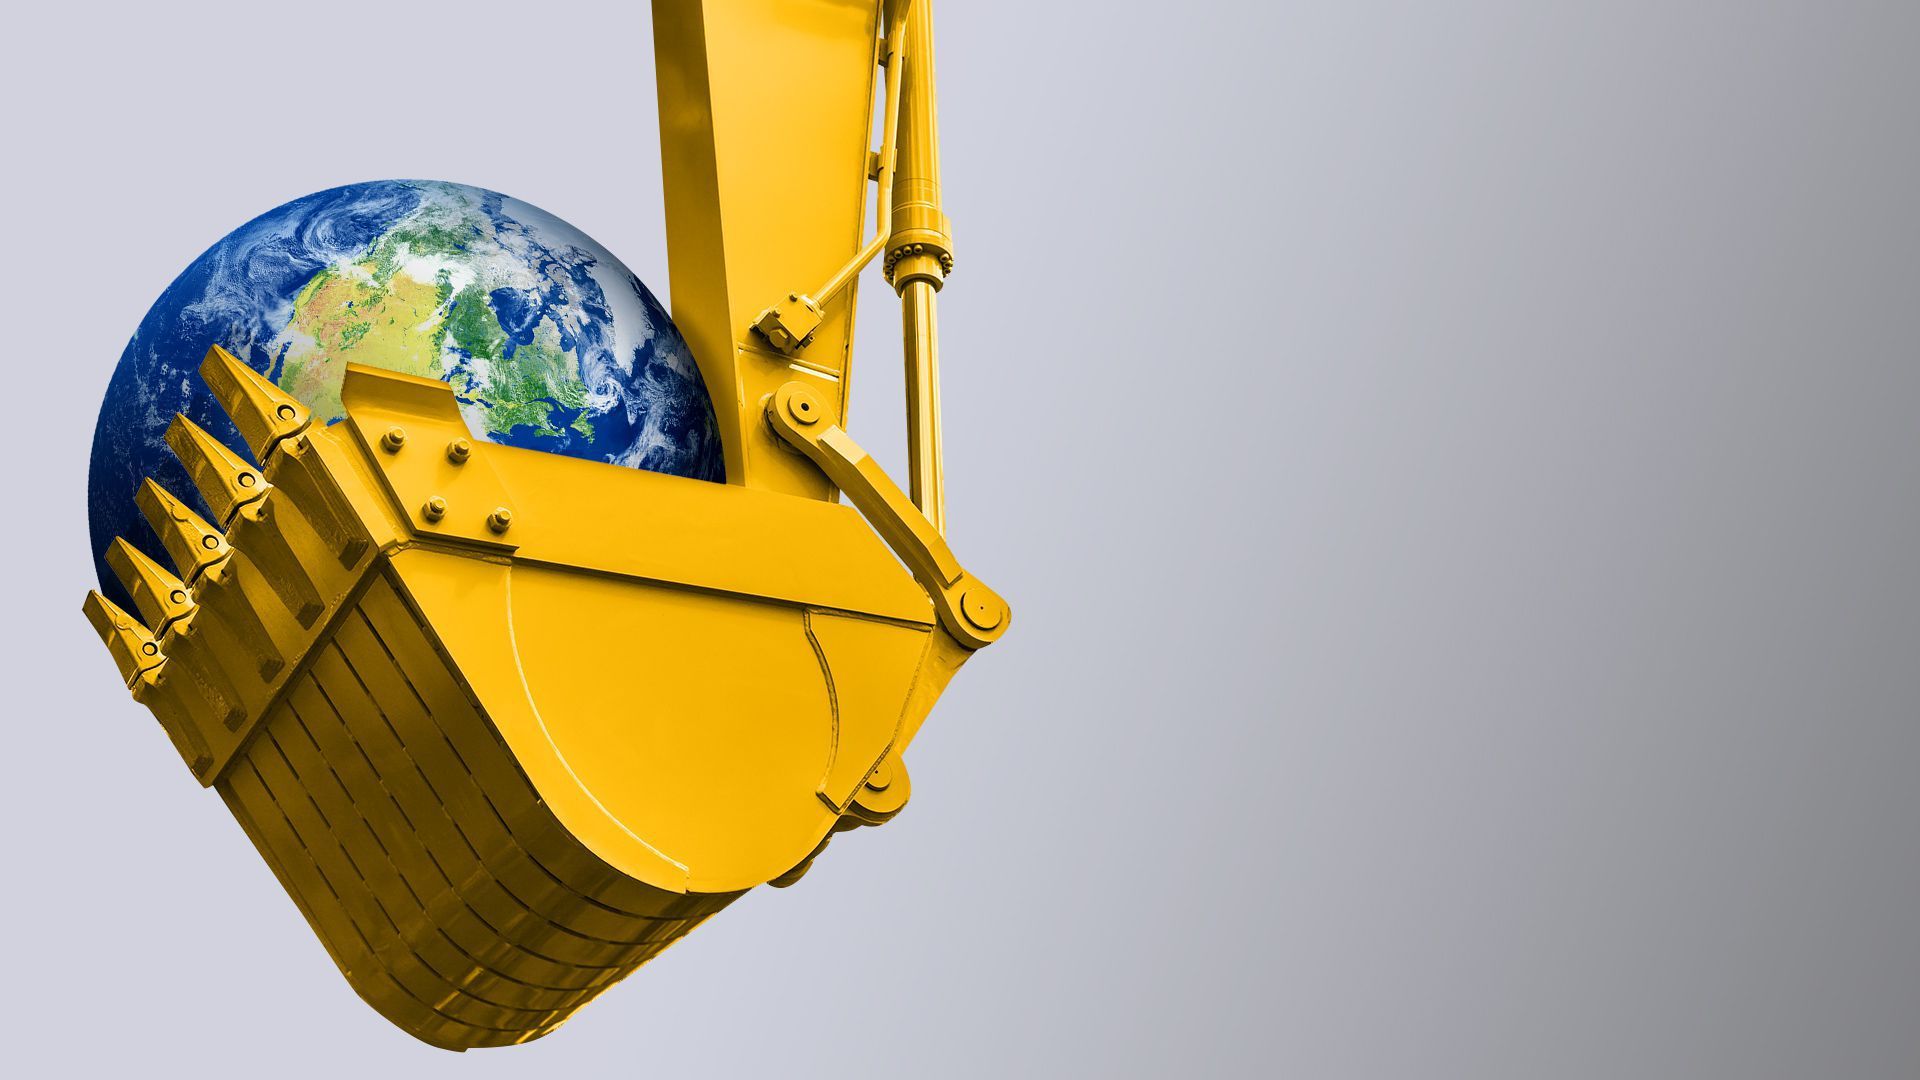 An illustration of a excavator holding a globe. 